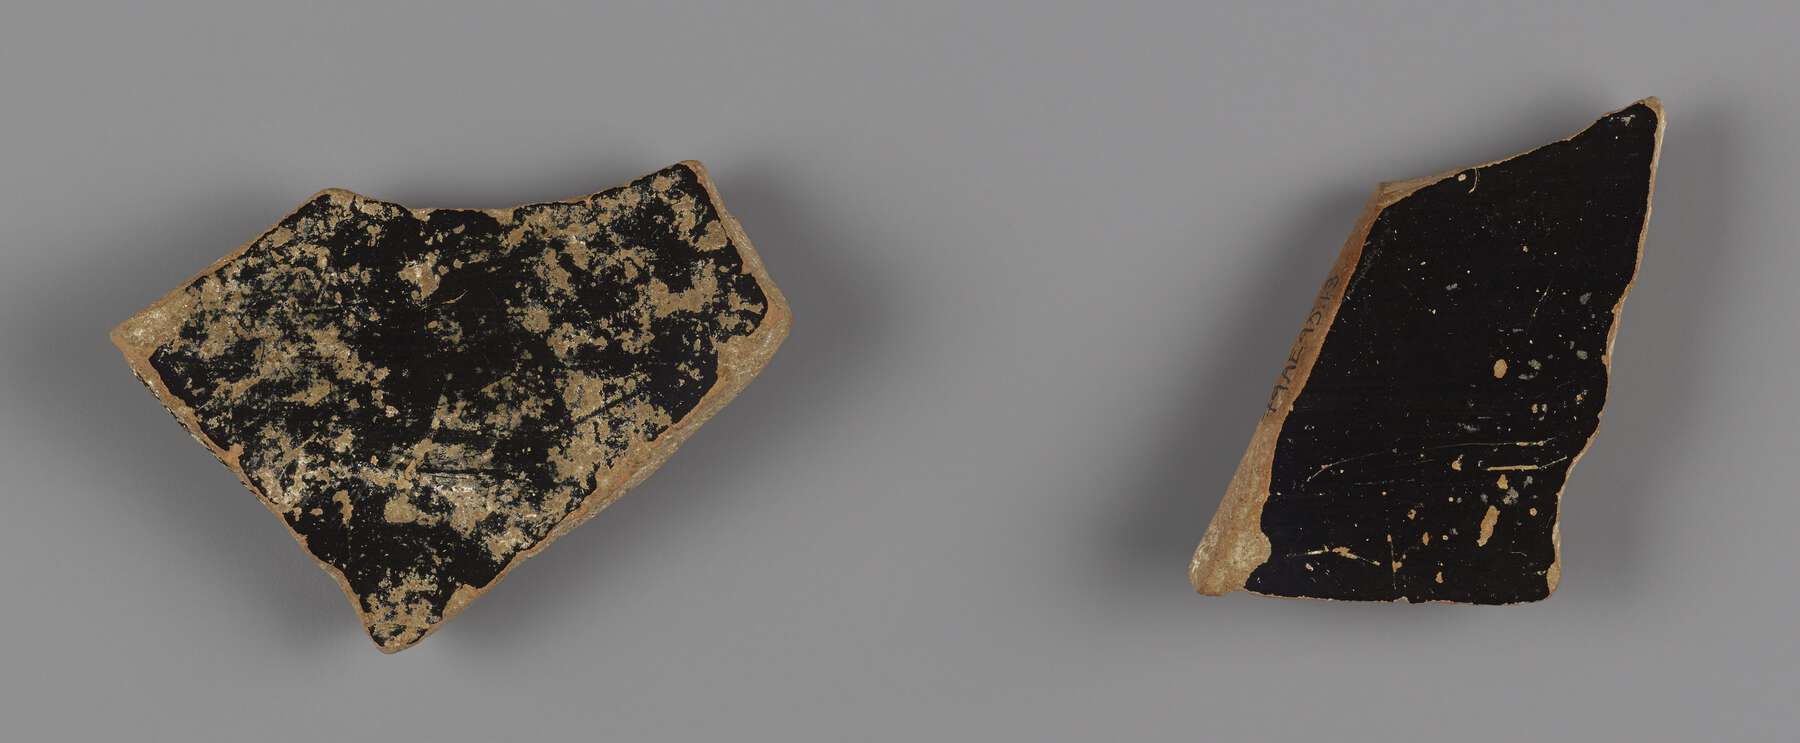 The back side of the two pottery fragments, one mostly black, the other is mottled